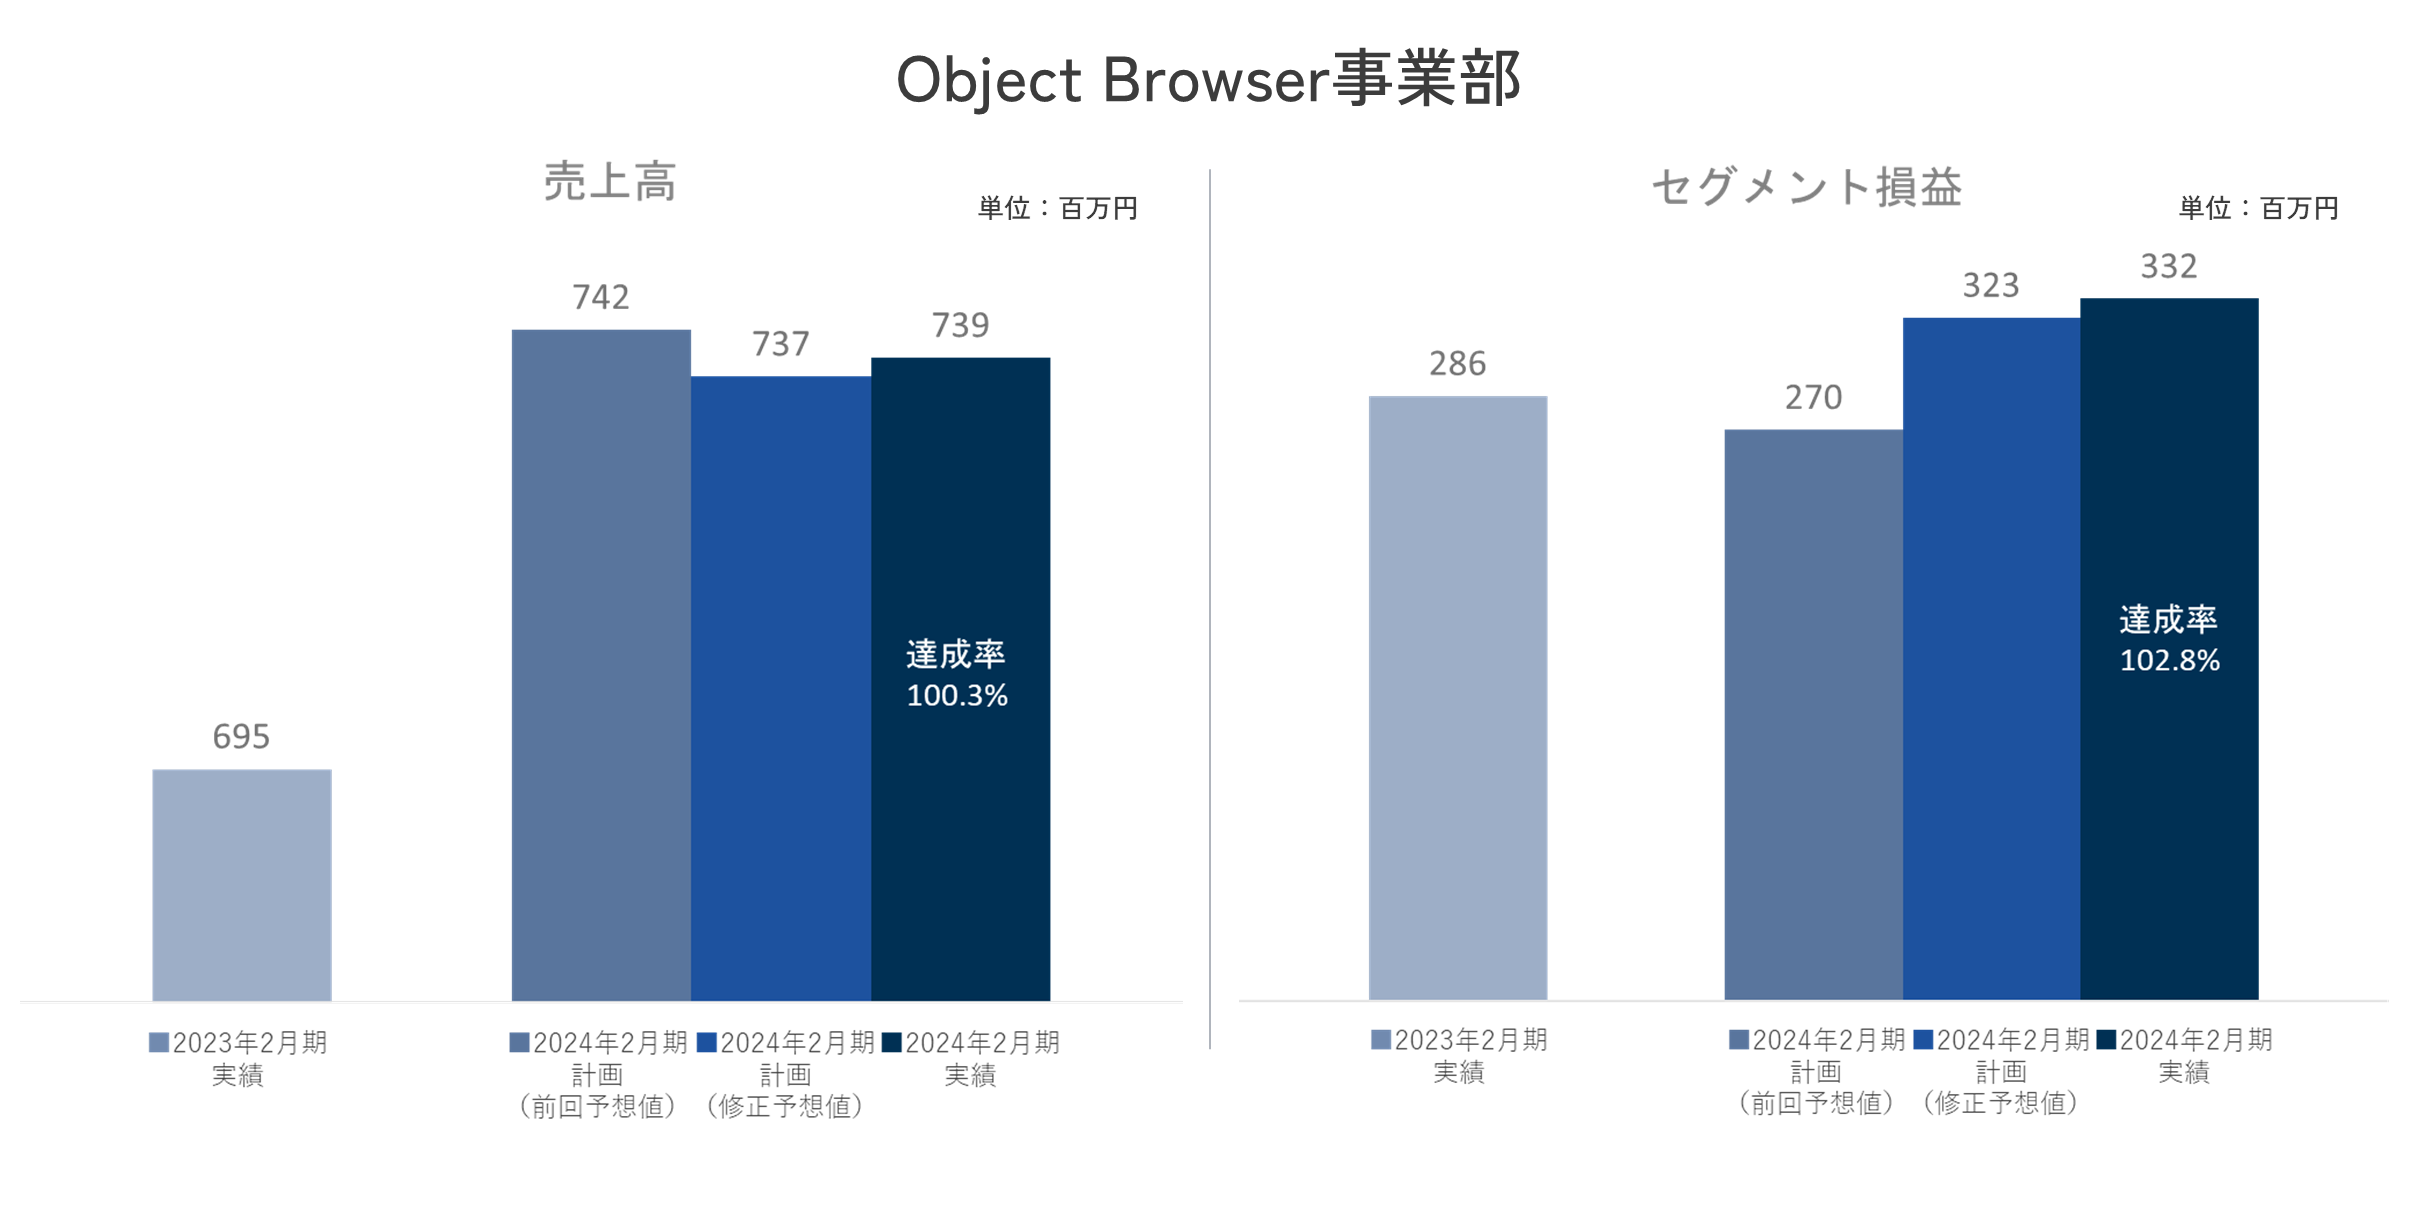 Object Browser事業